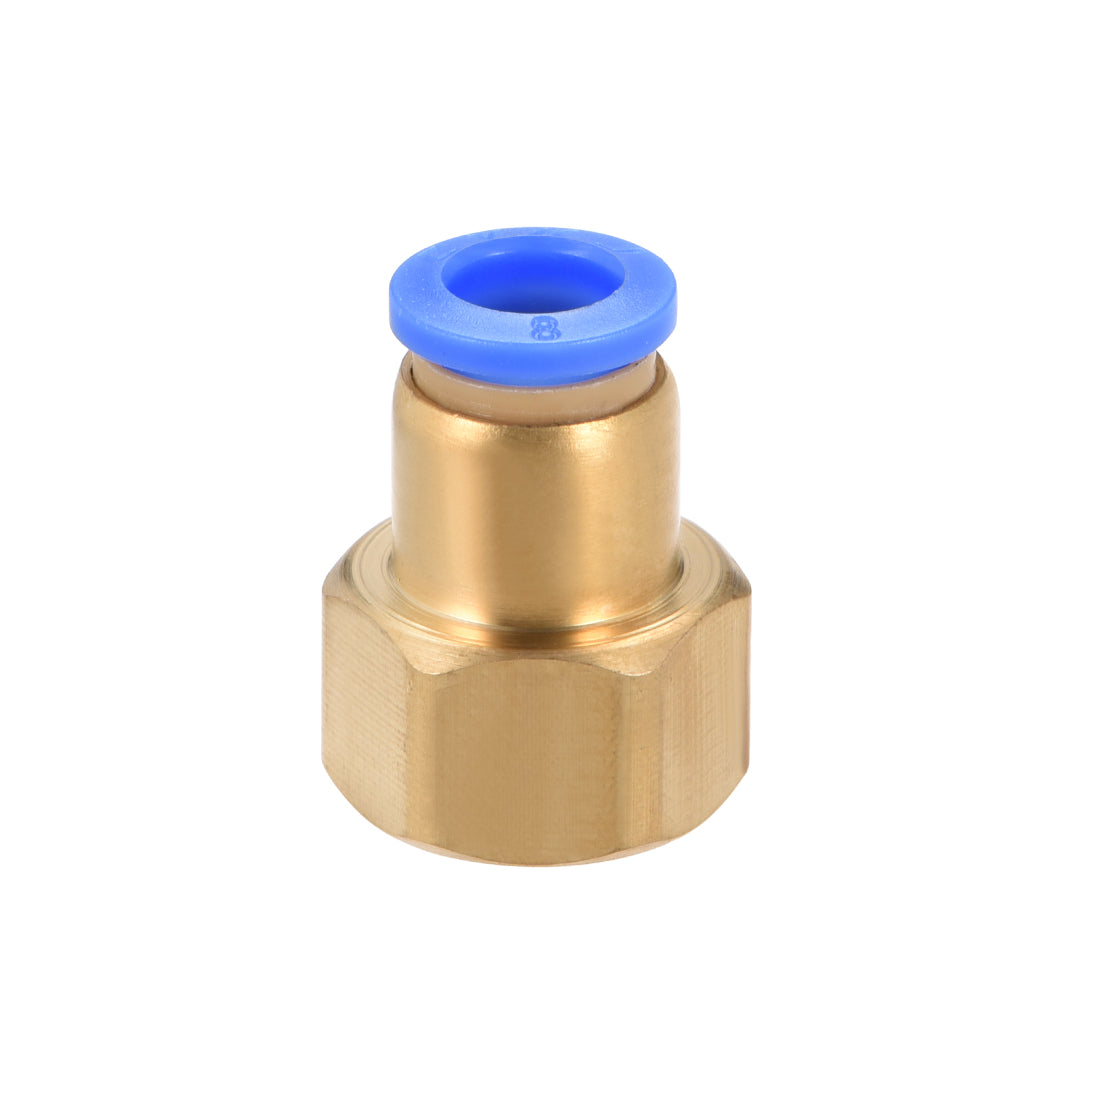 uxcell Uxcell Push to Connect Tube Fitting Adapter 8mm OD x G3/8" Female